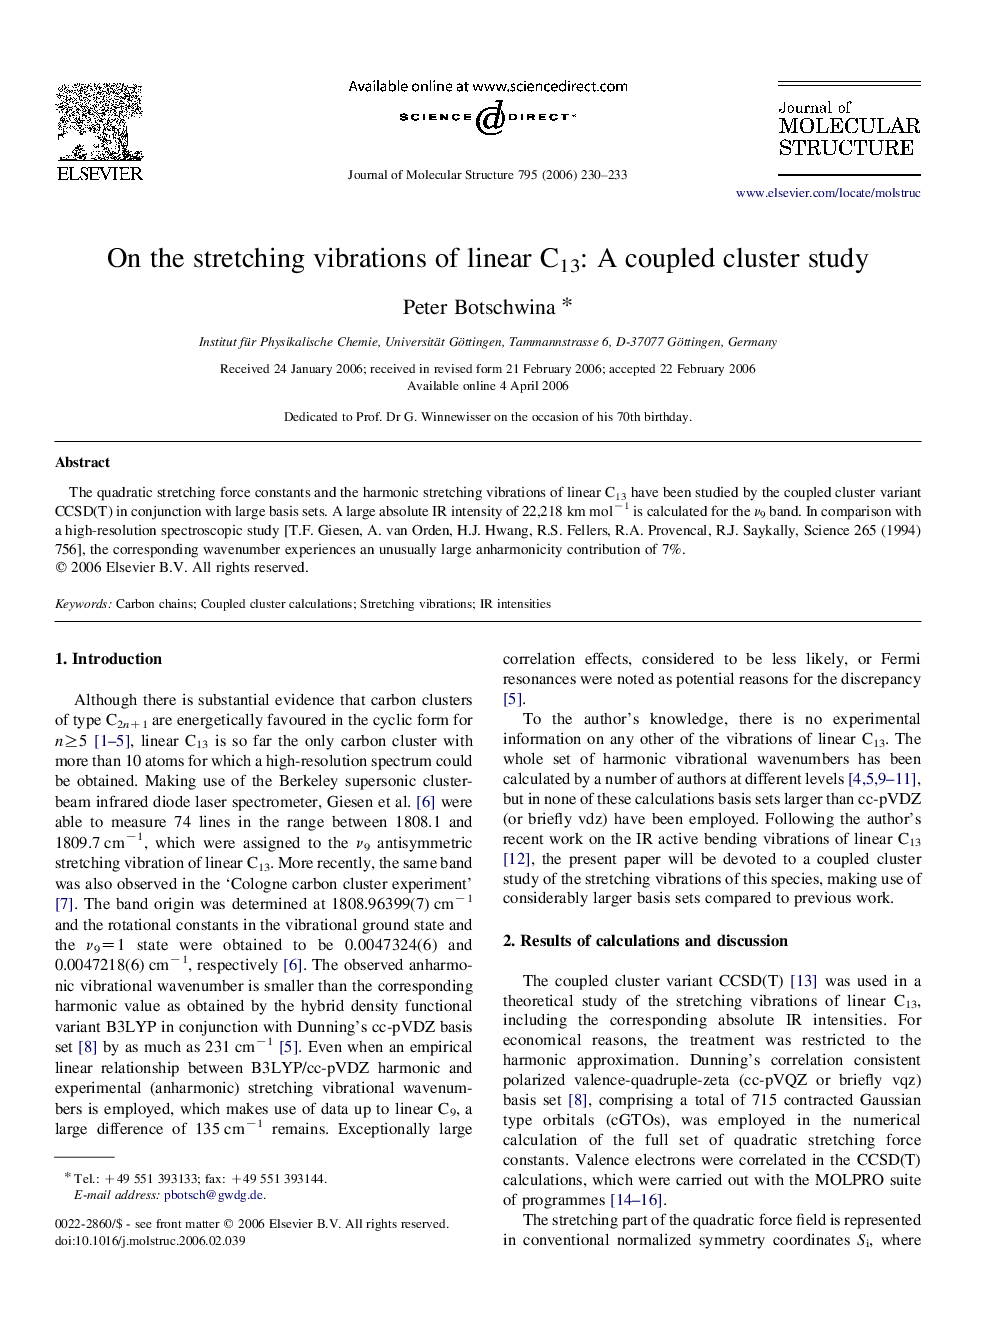 On the stretching vibrations of linear C13: A coupled cluster study